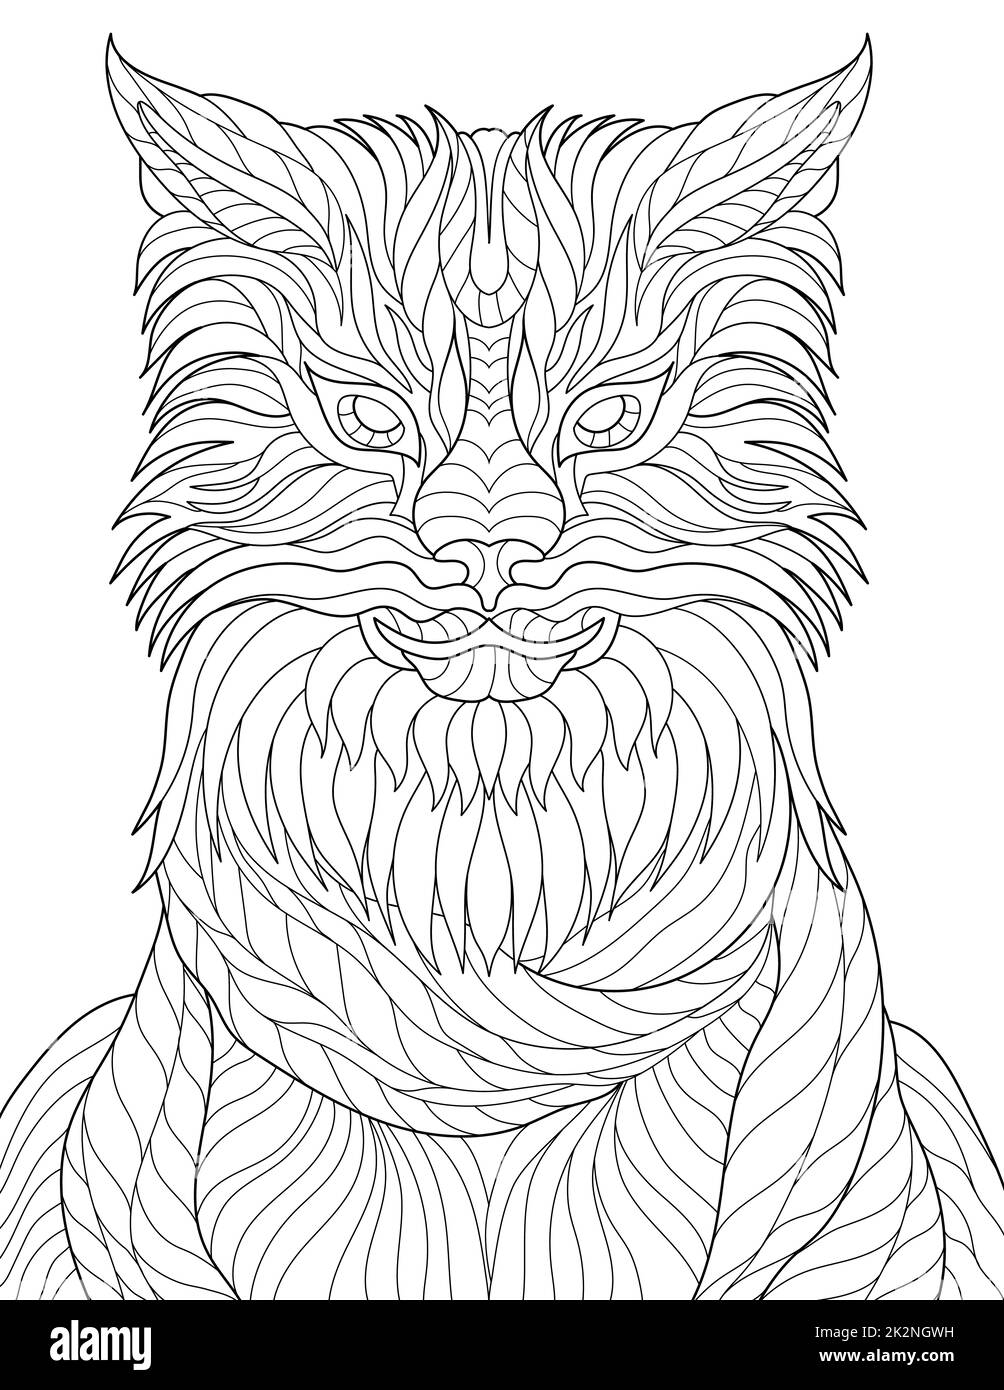 Abstract vector line drawing mythical dragon having scarf. Digital lineart image patterned unusual animal wearing shawl. Outline artwork design textured creature. Stock Photo